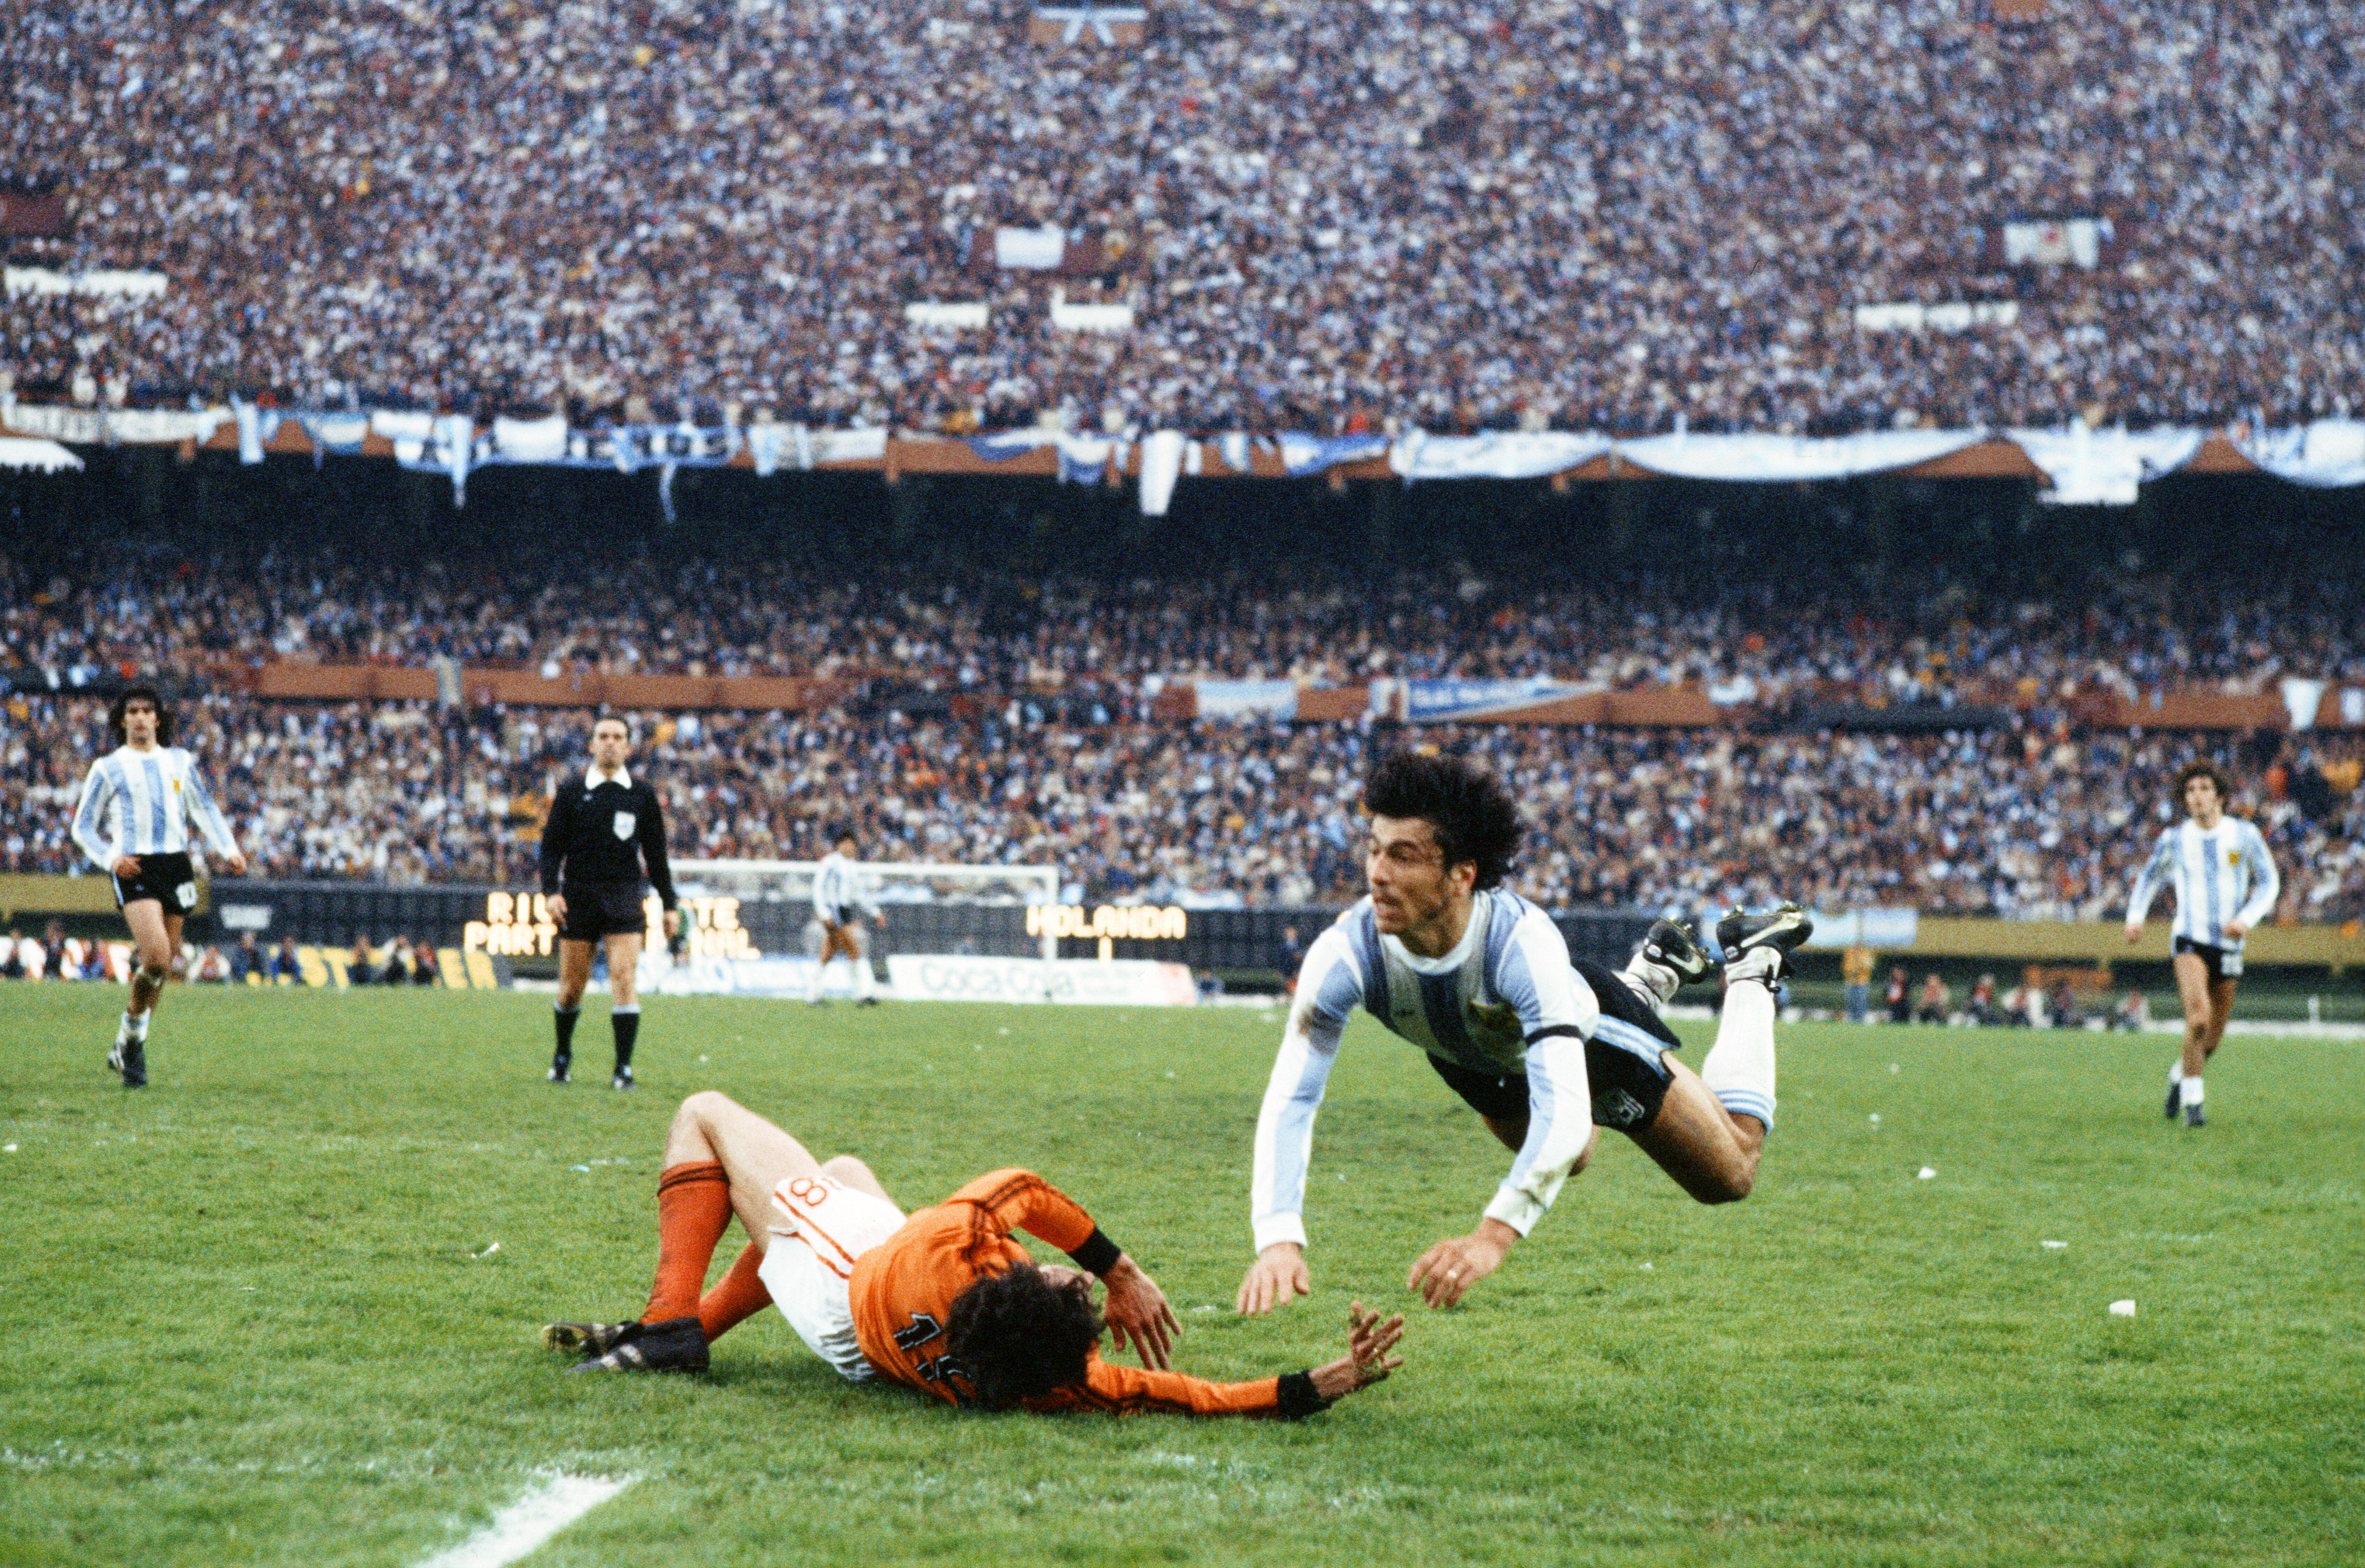 Argentina v Netherlands in the 1978 World Cup final